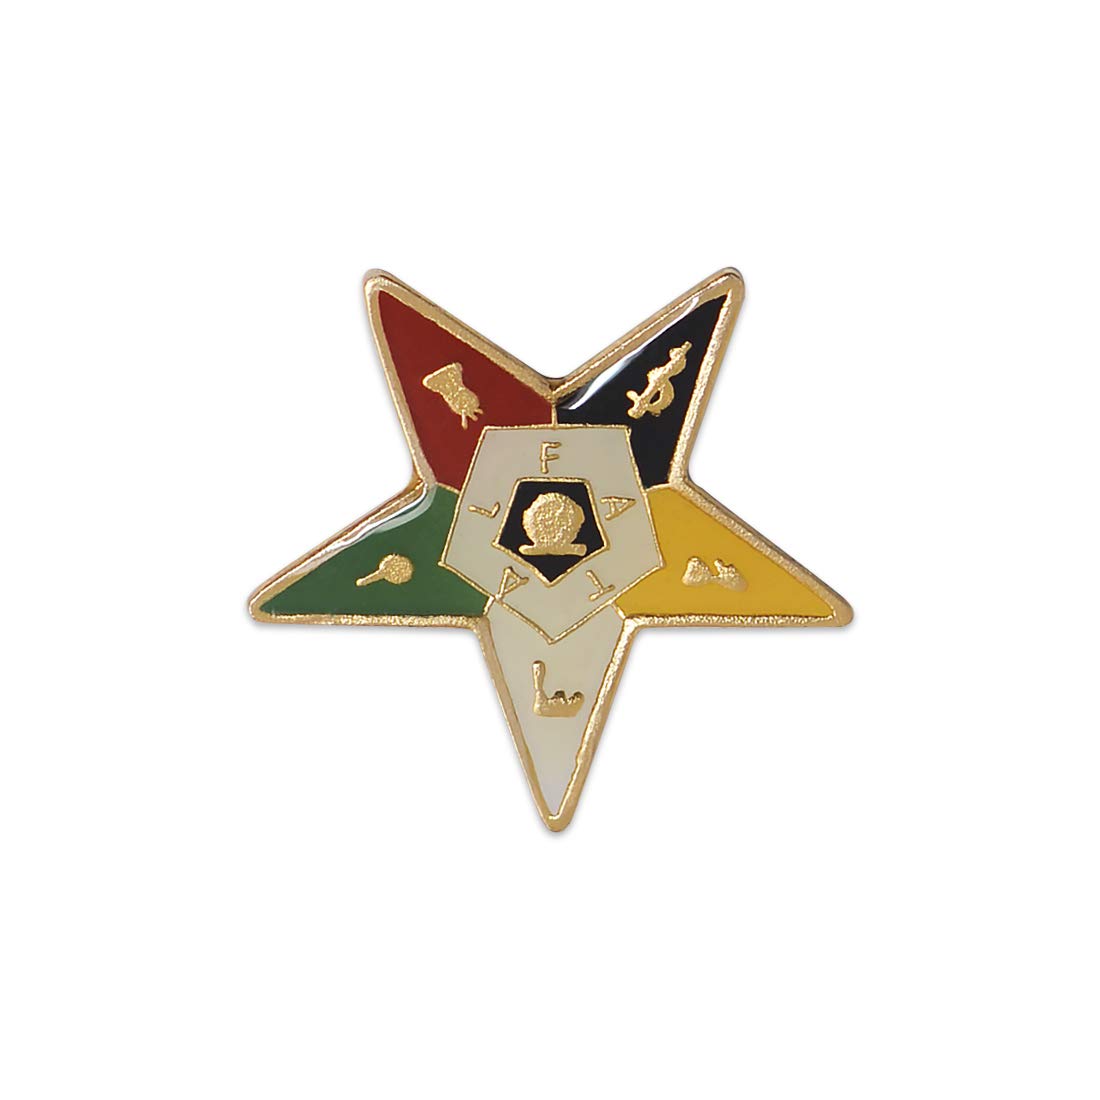 Order of The Eastern Star Masonic Lapel Pin - [Gold & White][1'' Tall]